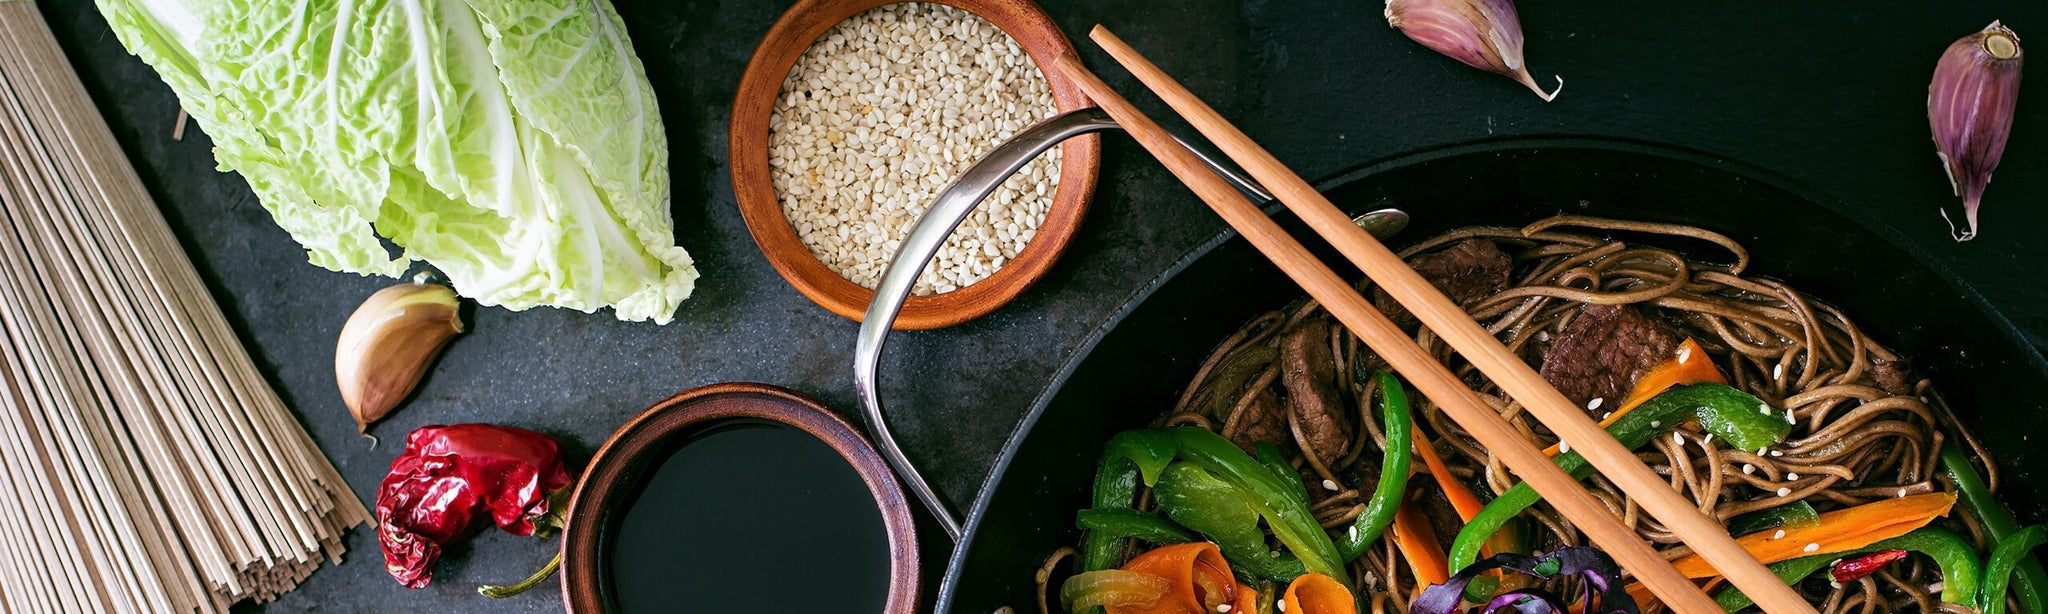 Asian Sticky Pork with Steamed Greens and Buckwheat Soba Noodles